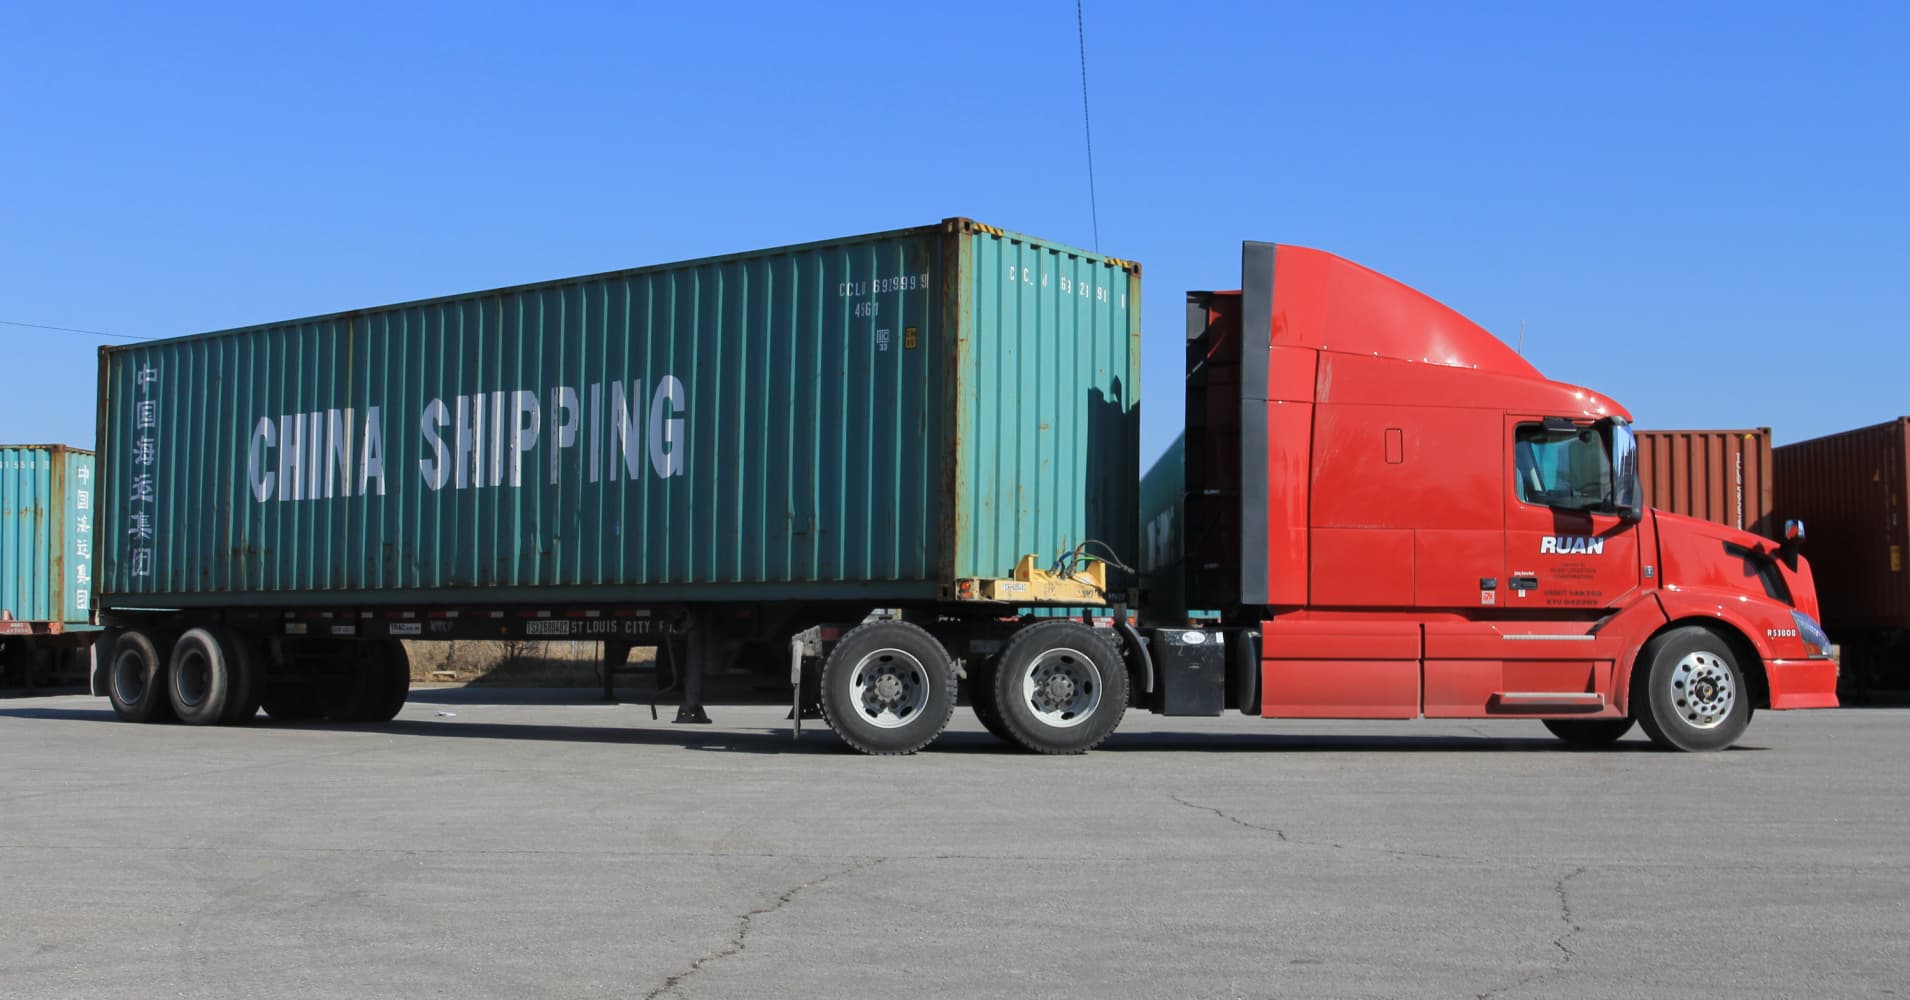 Investing in transports: Intermodal part of freight ...